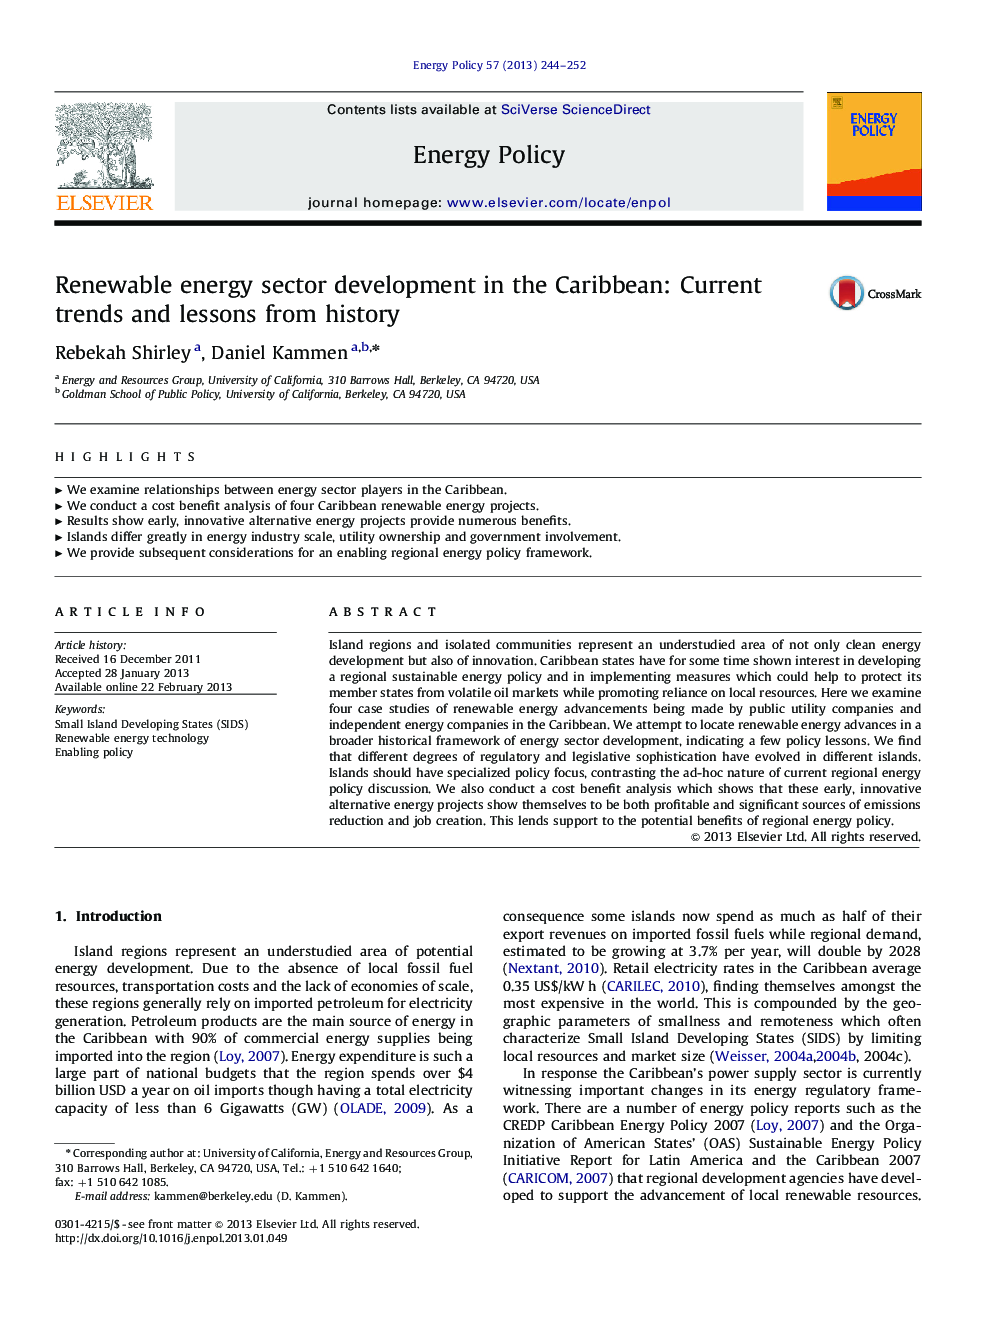 Renewable energy sector development in the Caribbean: Current trends and lessons from history